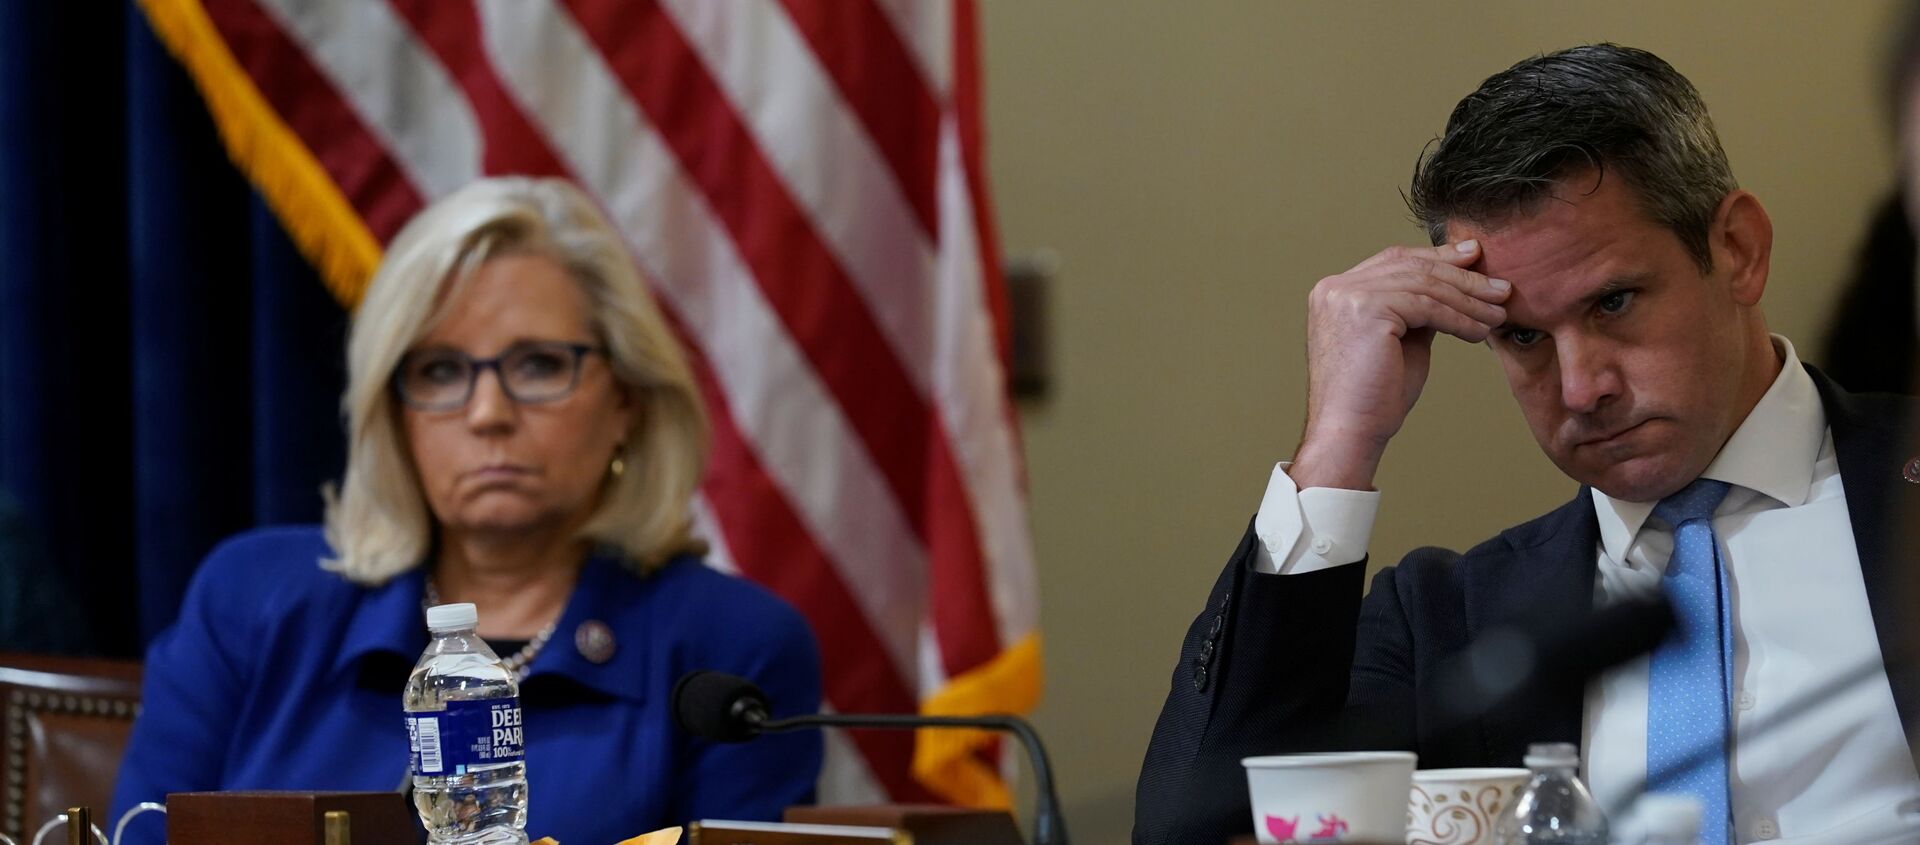 U.S. Rep. Liz Cheney, R-Wyo., and Rep. Adam Kinzinger, R-Ill., listen as Rep. Elaine Luria, D-Va., speaks during the House select committee hearing on the Jan. 6 attack on Capitol Hill in Washington, U.S., July 27, 2021 - Sputnik International, 1920, 28.07.2021